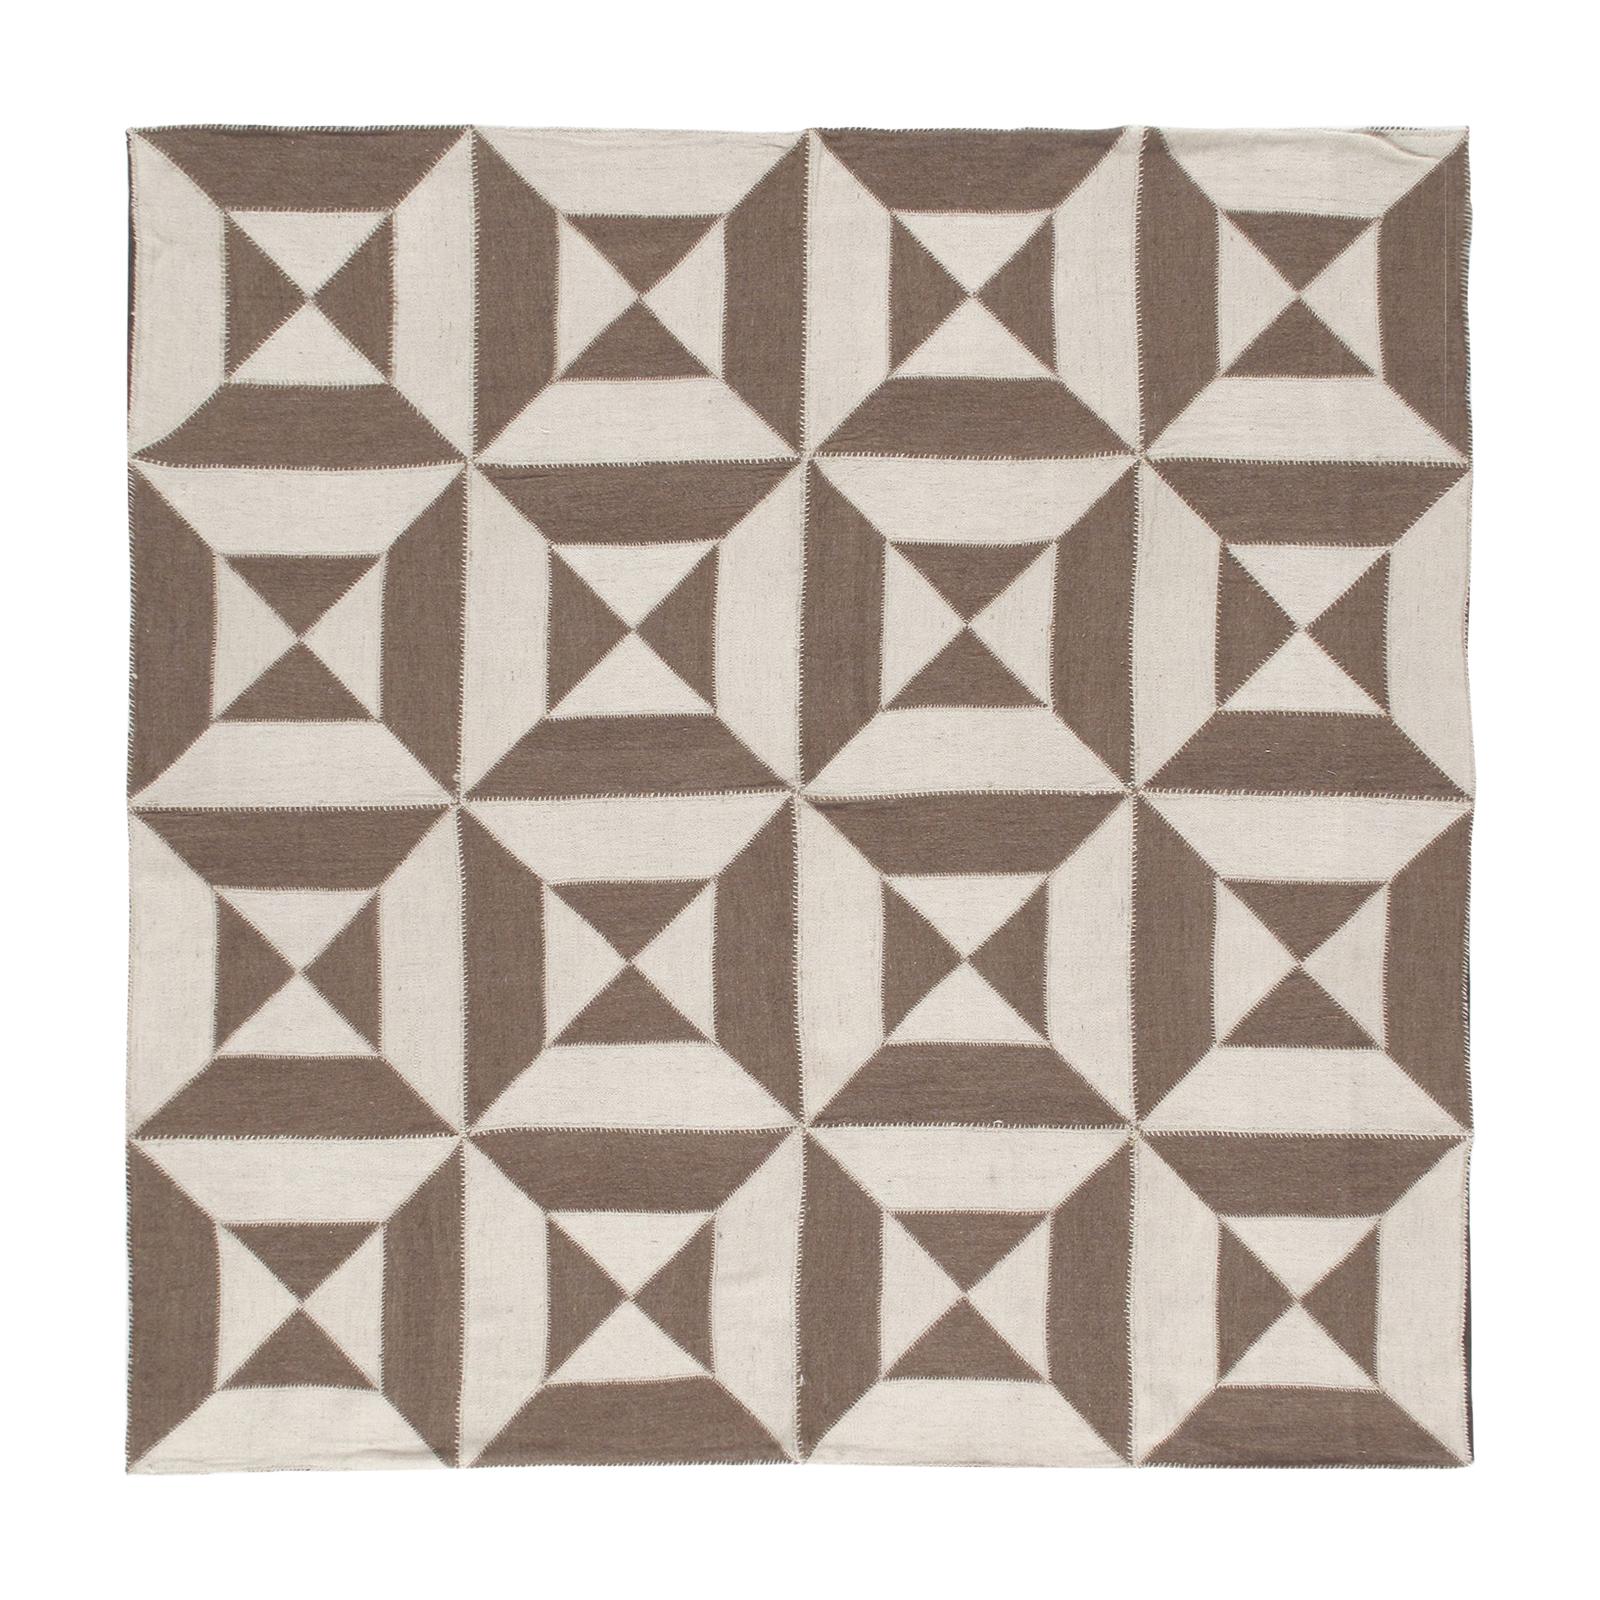 Modern Shiraz Handwoven Flatweave Geometric Square Rug in Beige and Brown For Sale